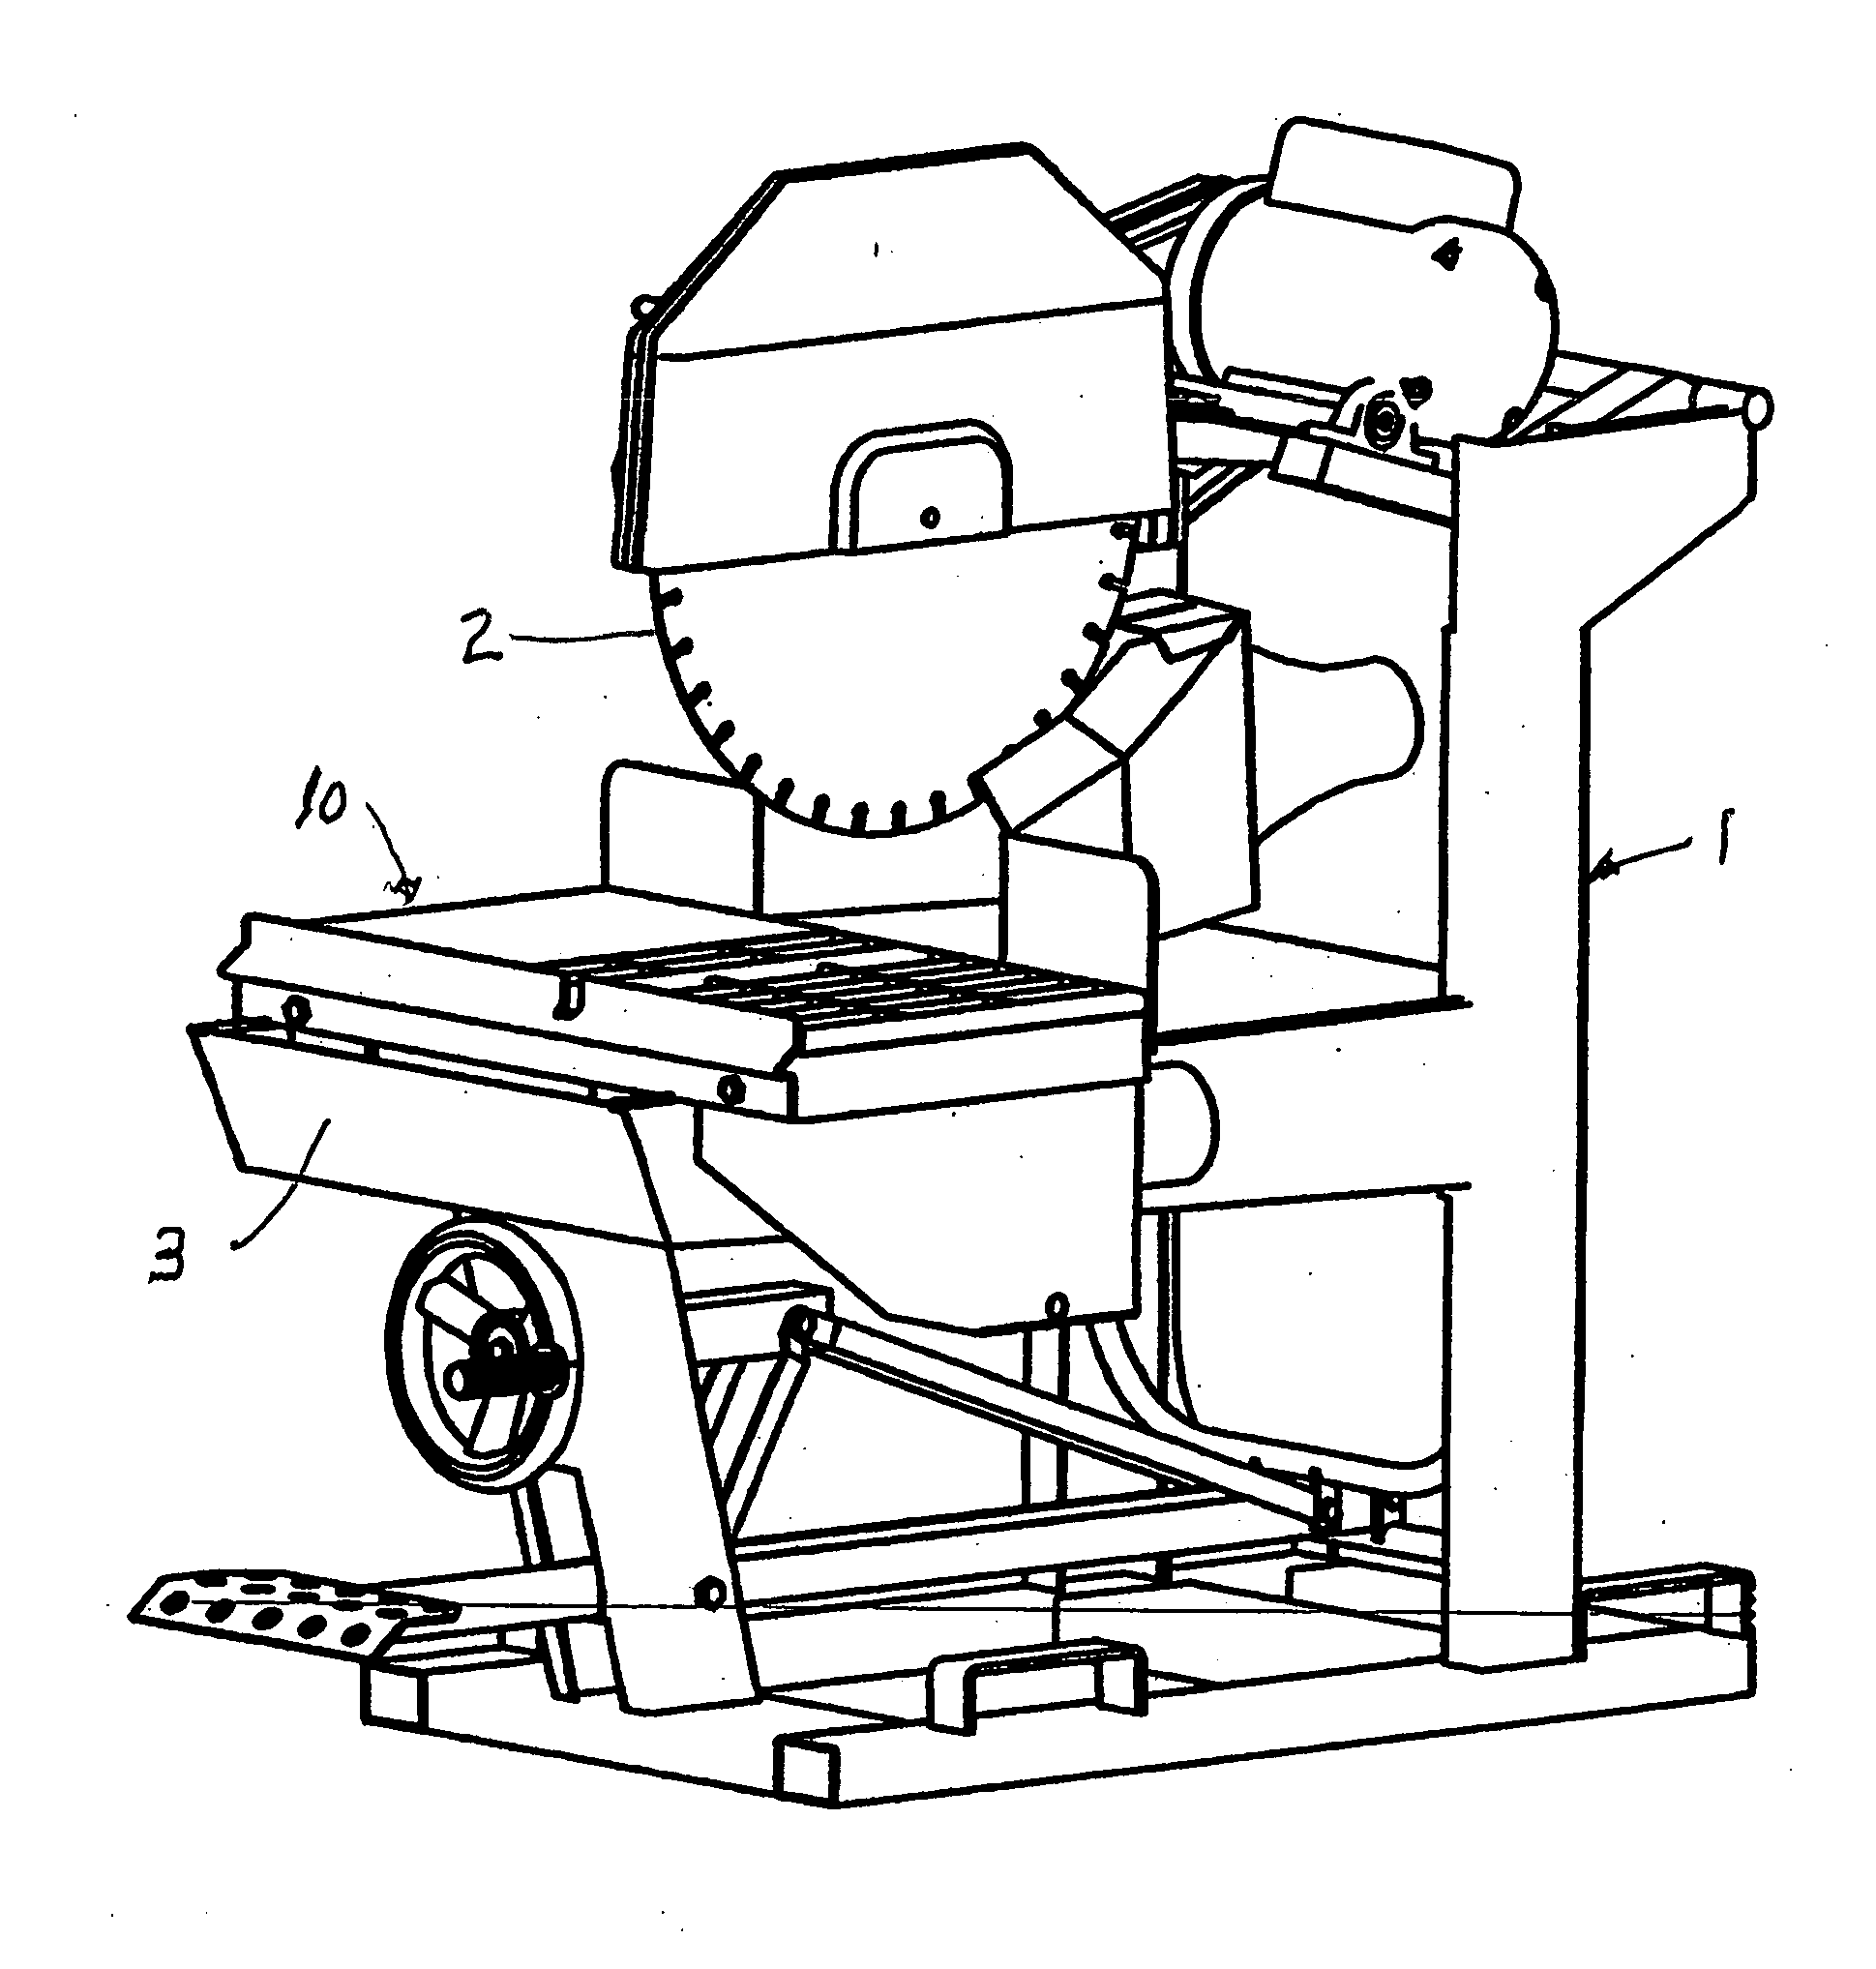 Dust collection system for a masonry saw